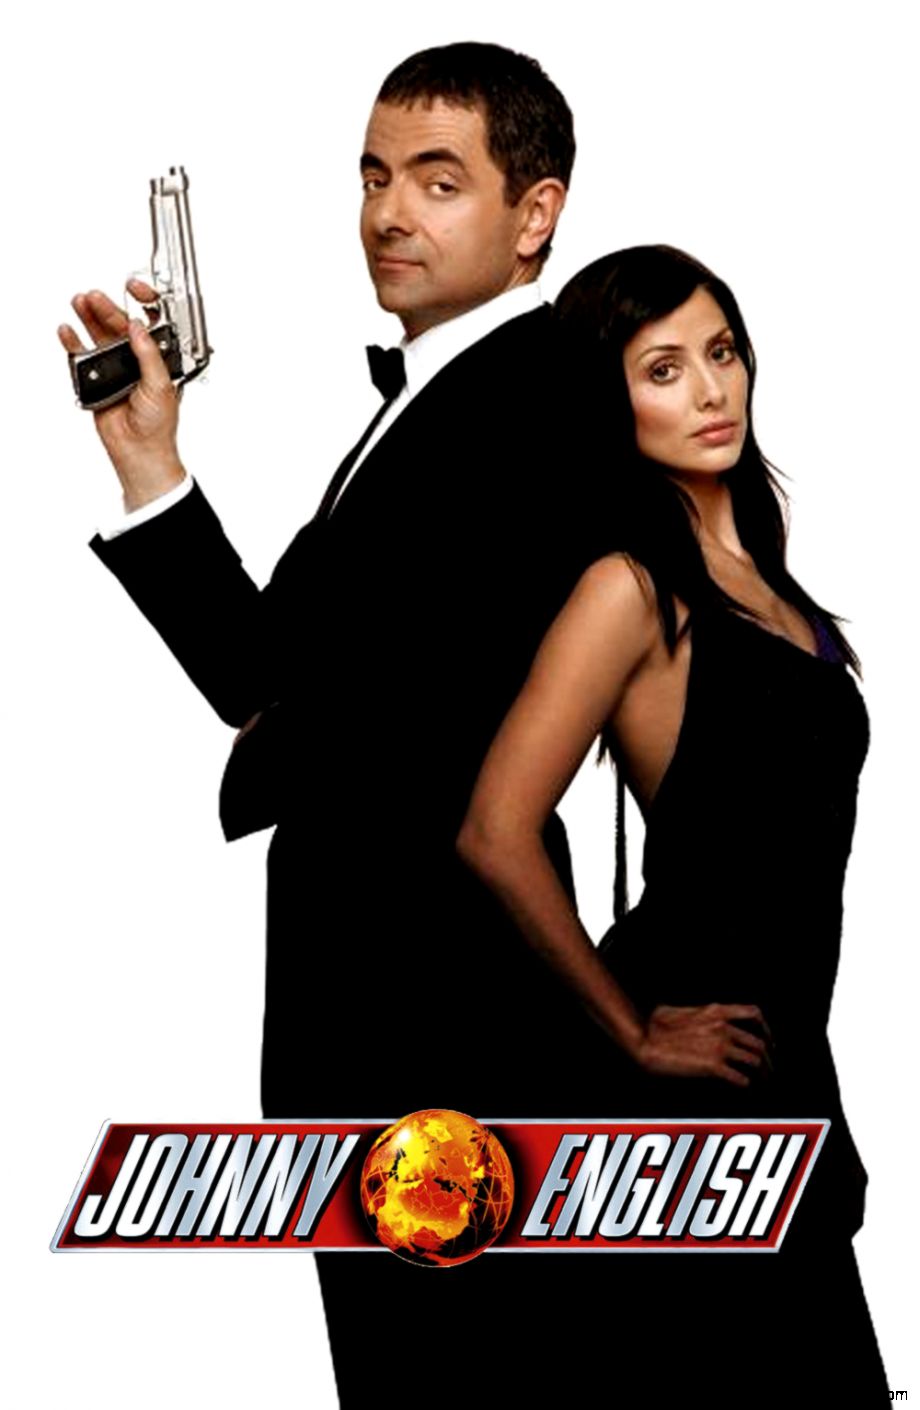 Johnny English Poster Wallpapers